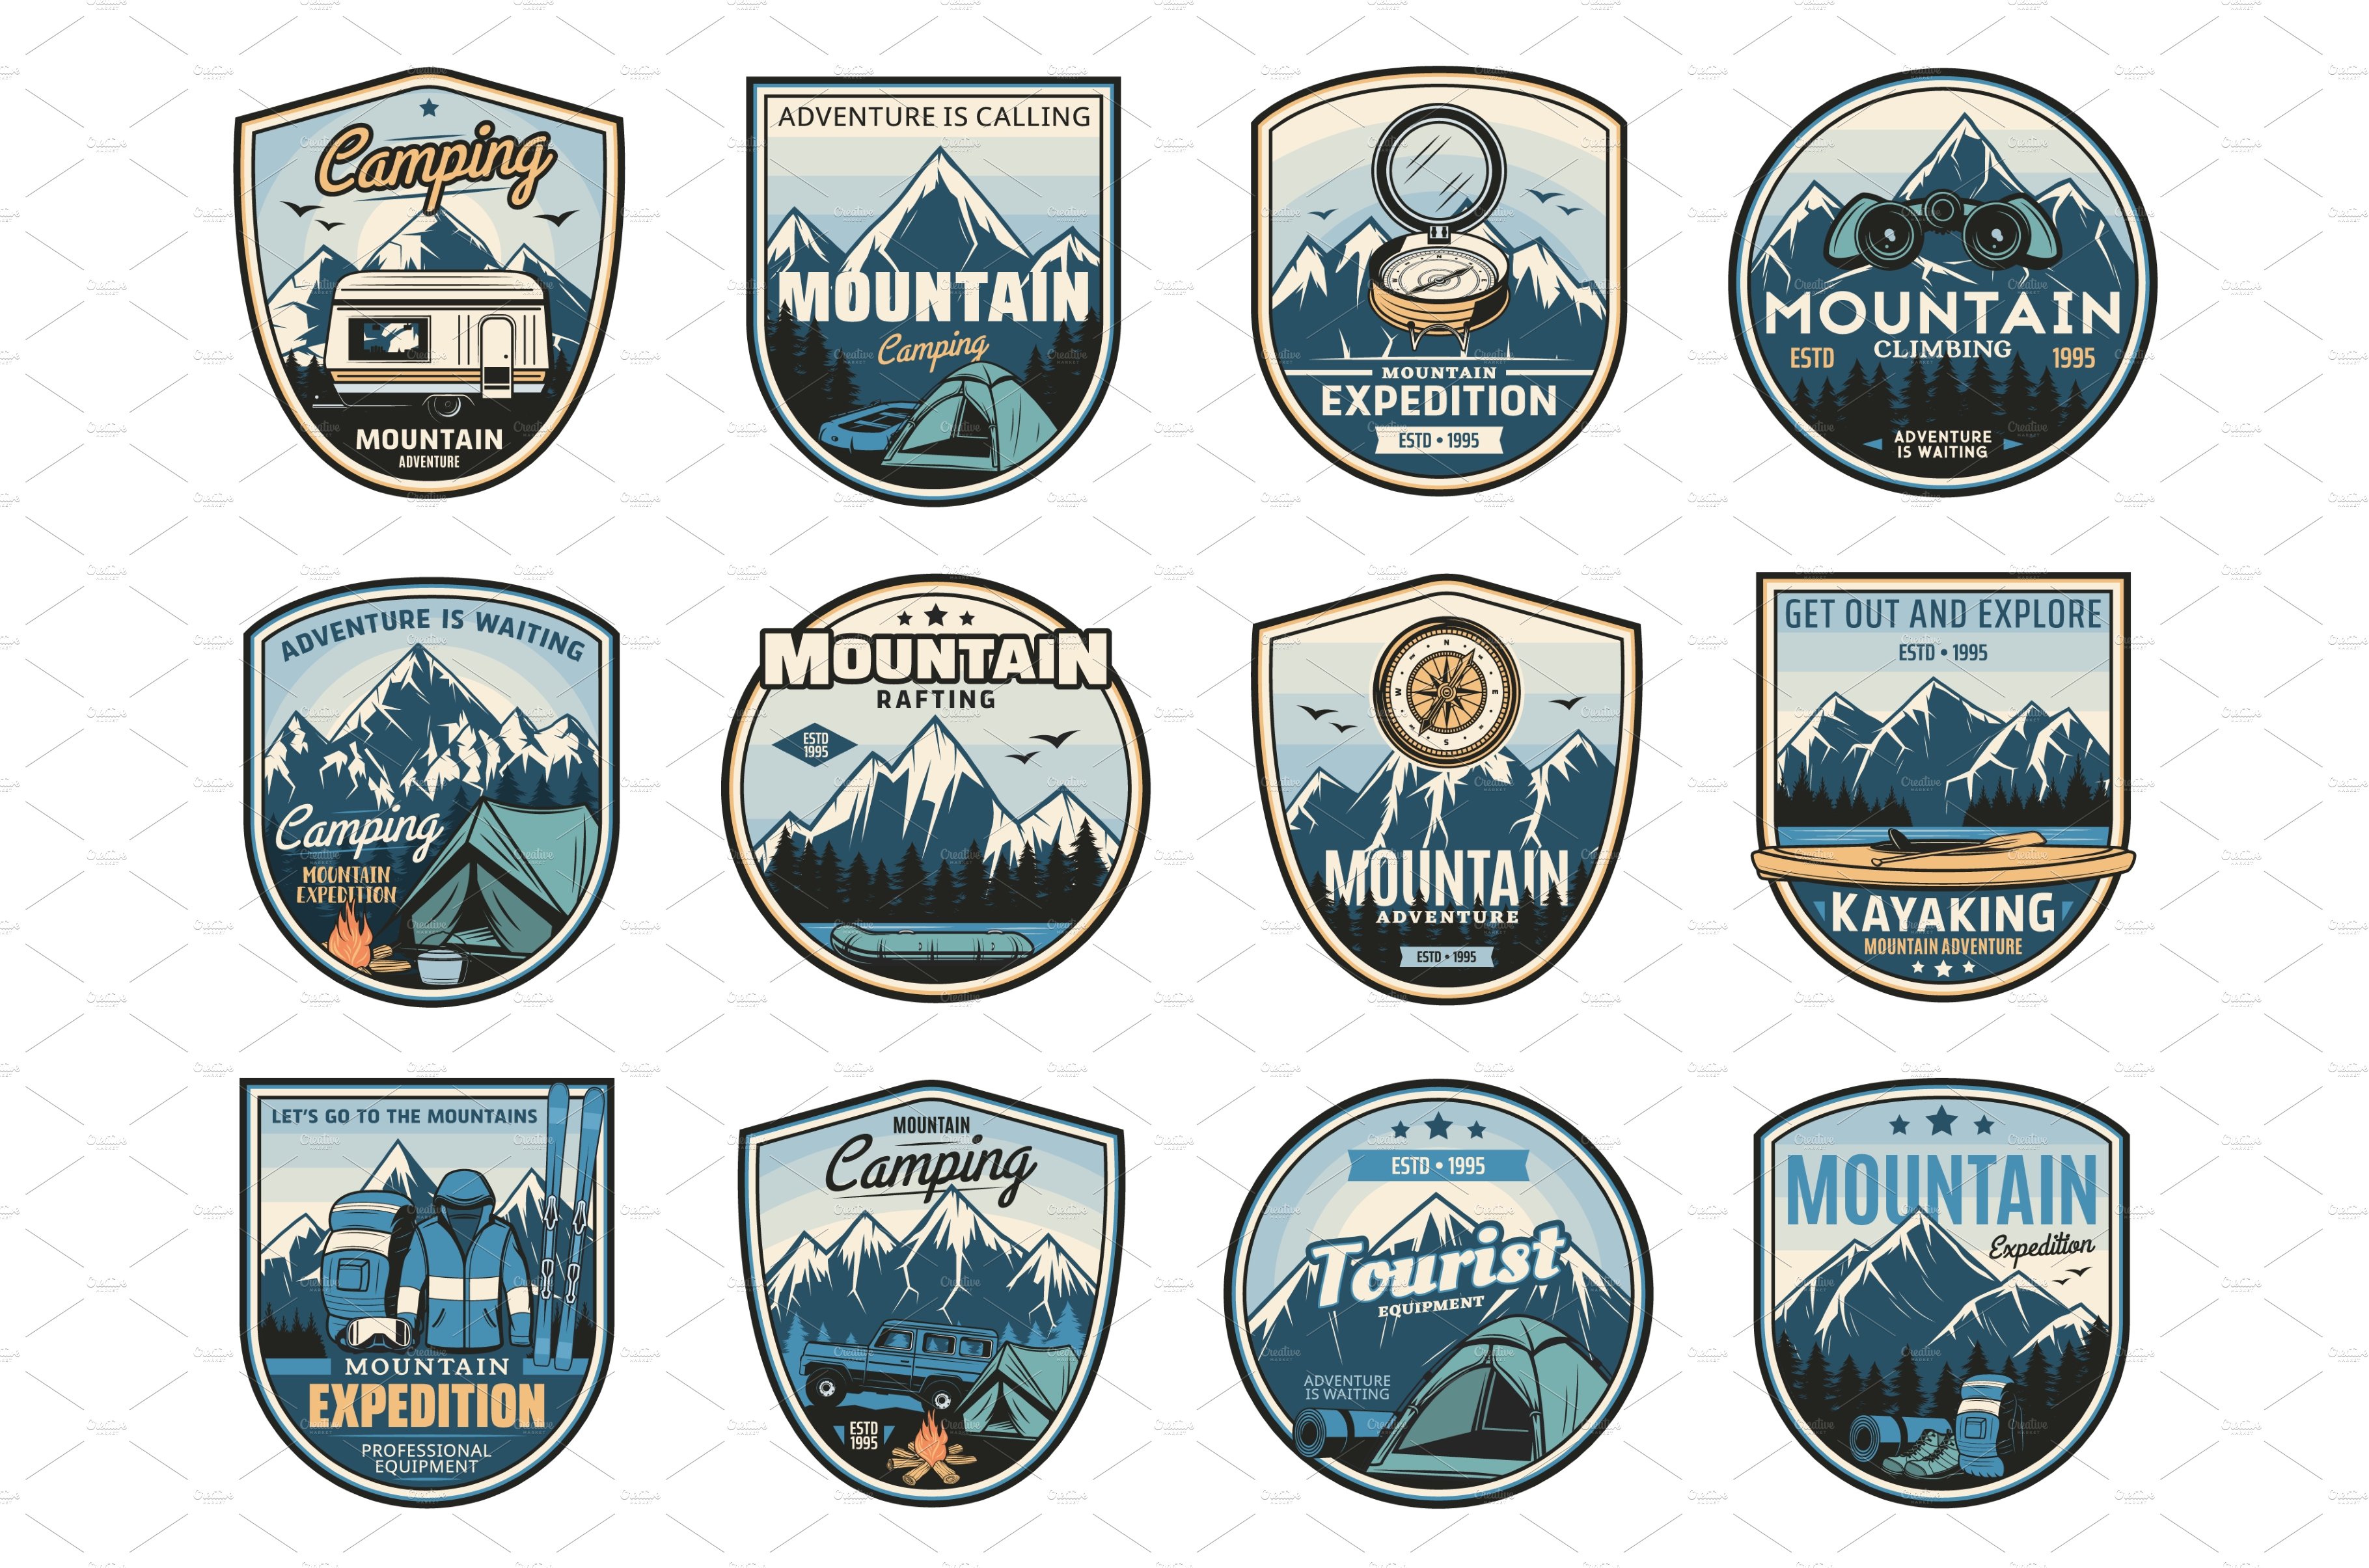 Mountain camping expedition icons cover image.